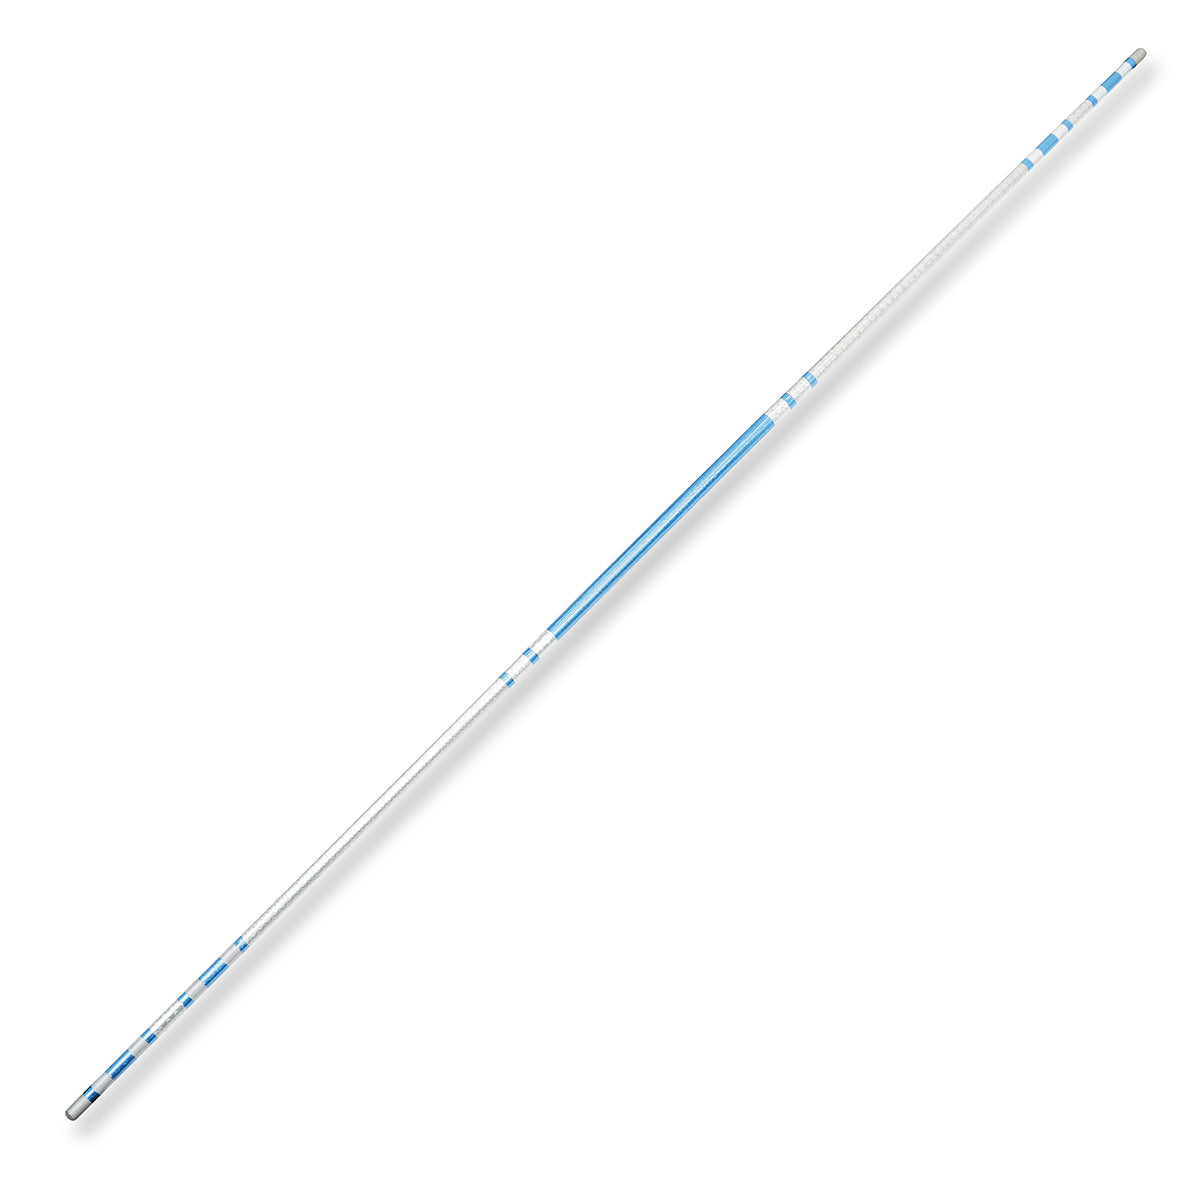 Chrome Competition Silver/Blue Ultra Light Bo Staff - 72"